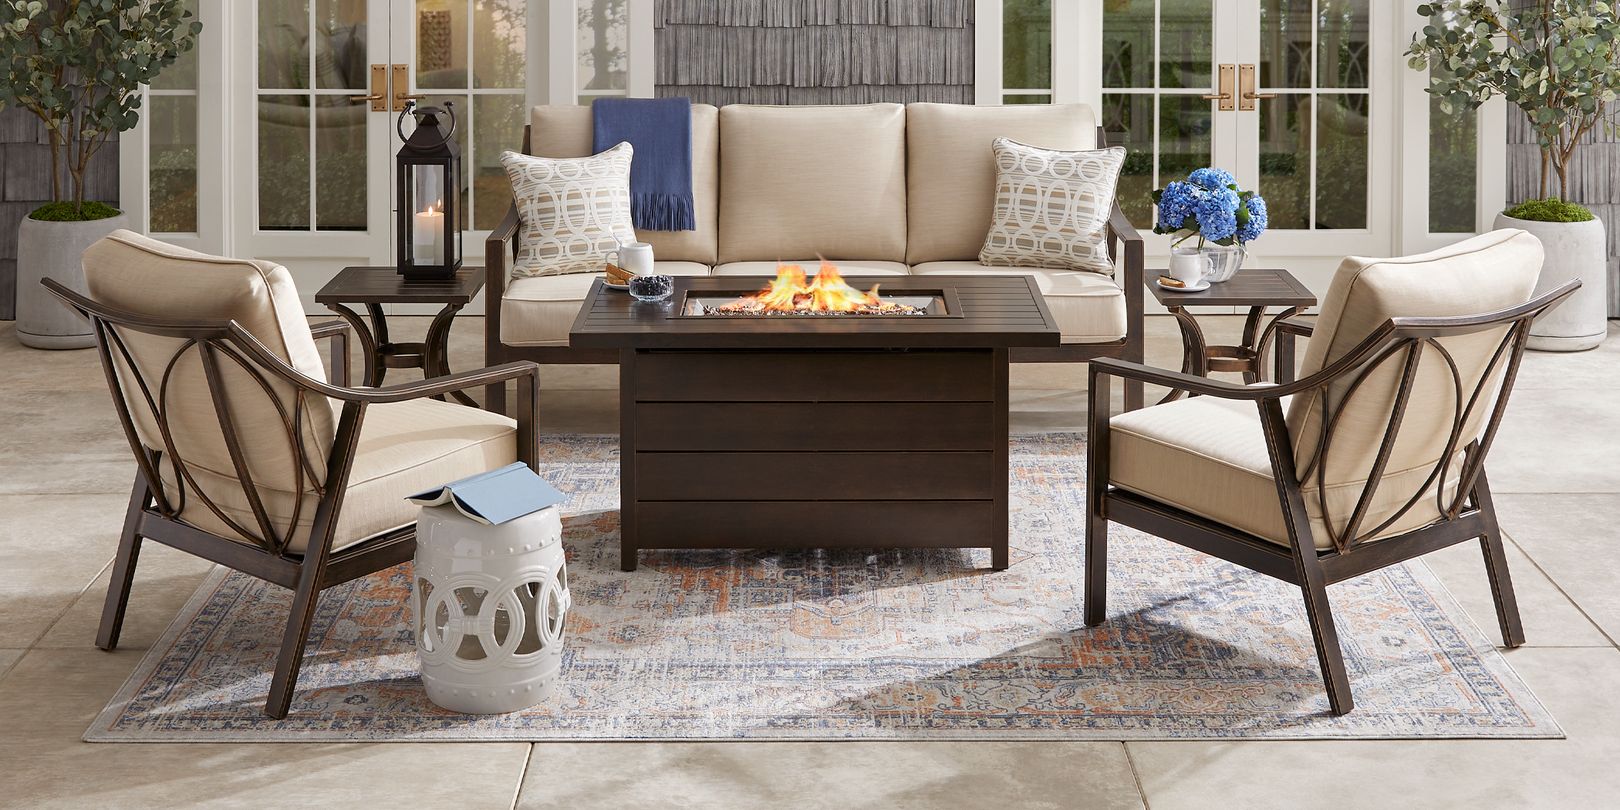 Photo of brown metal outdoor seating set and brown fire pit